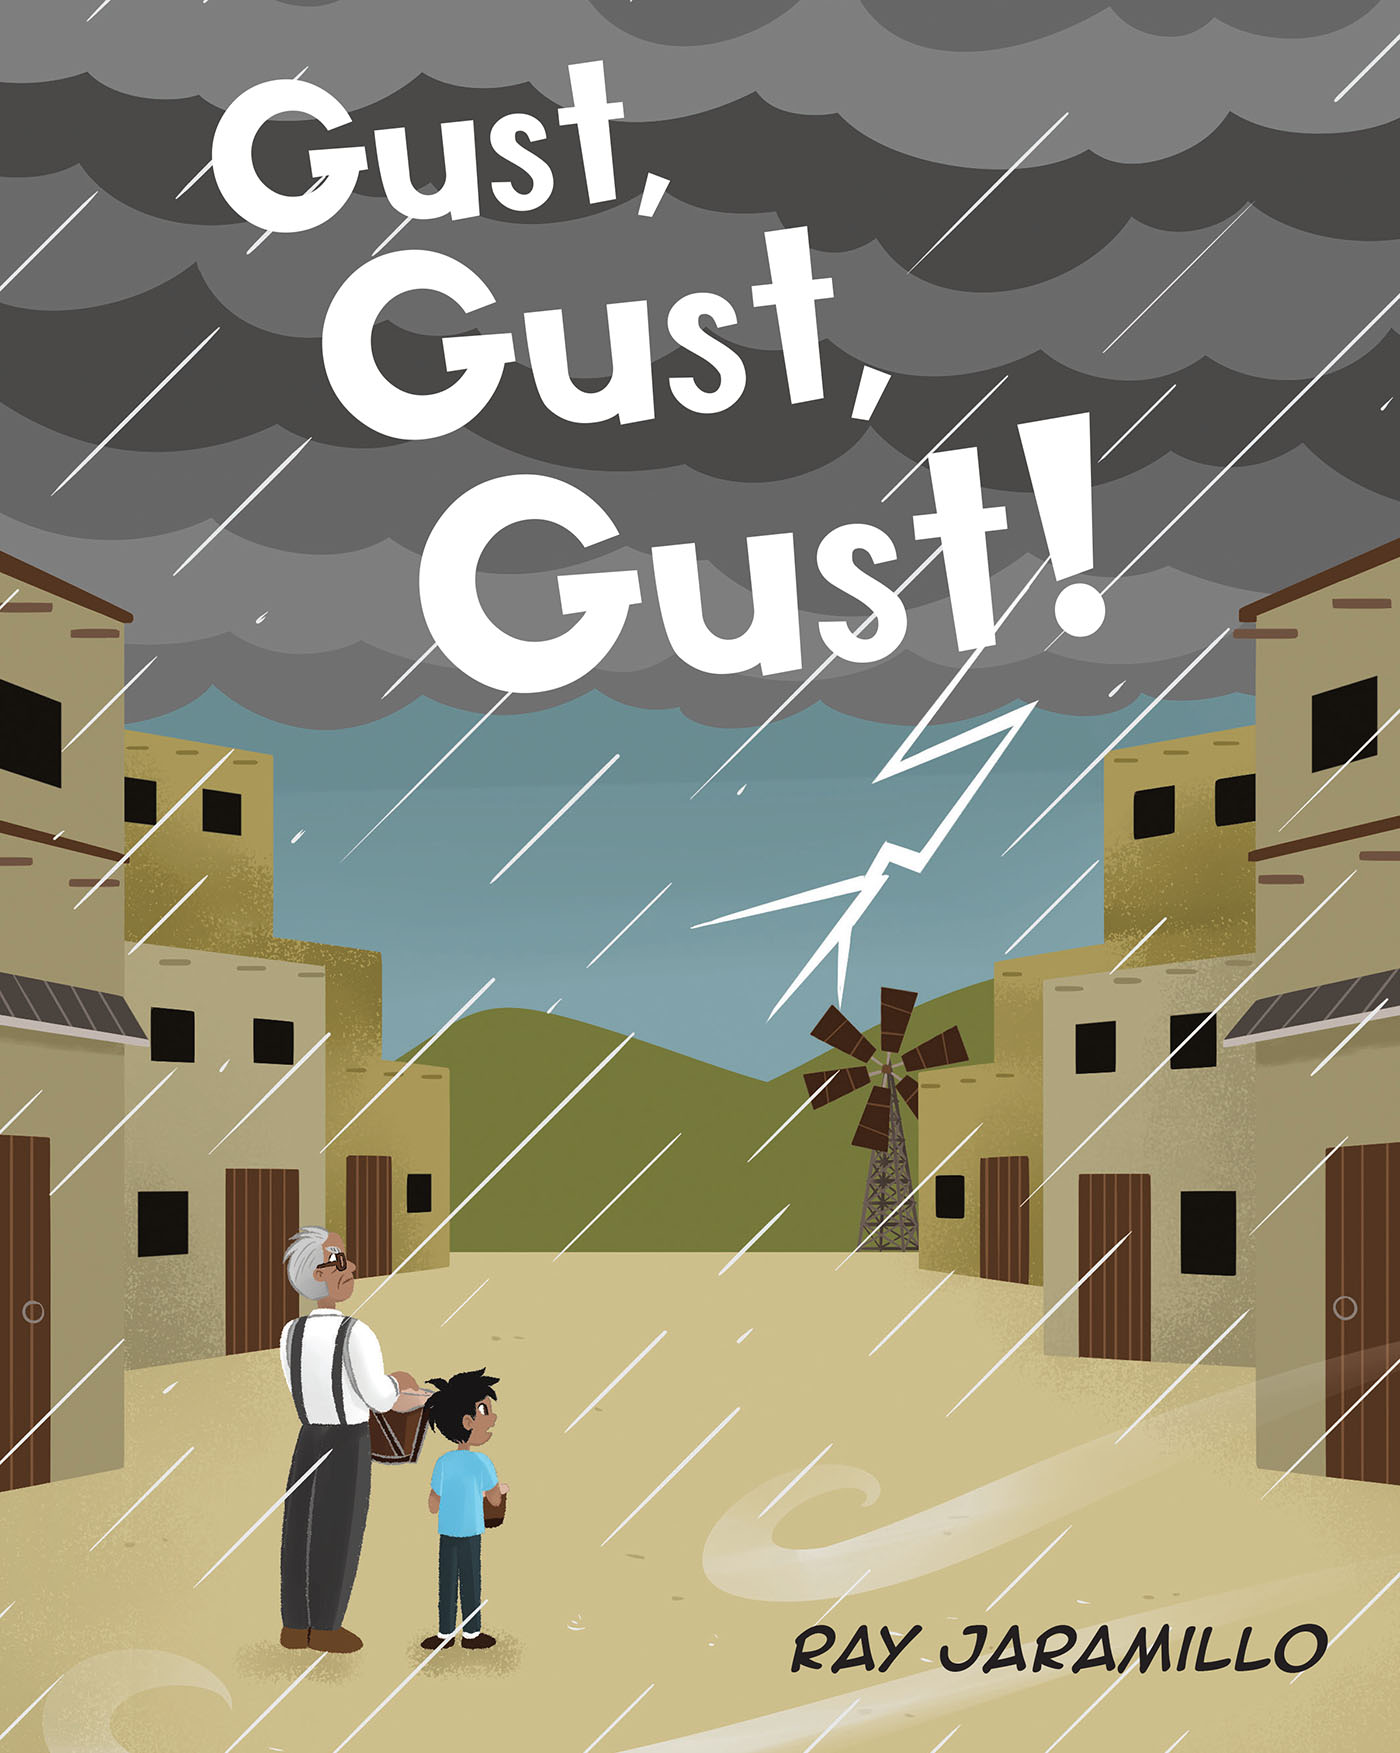 Gust, Gust, Gust! Cover Image